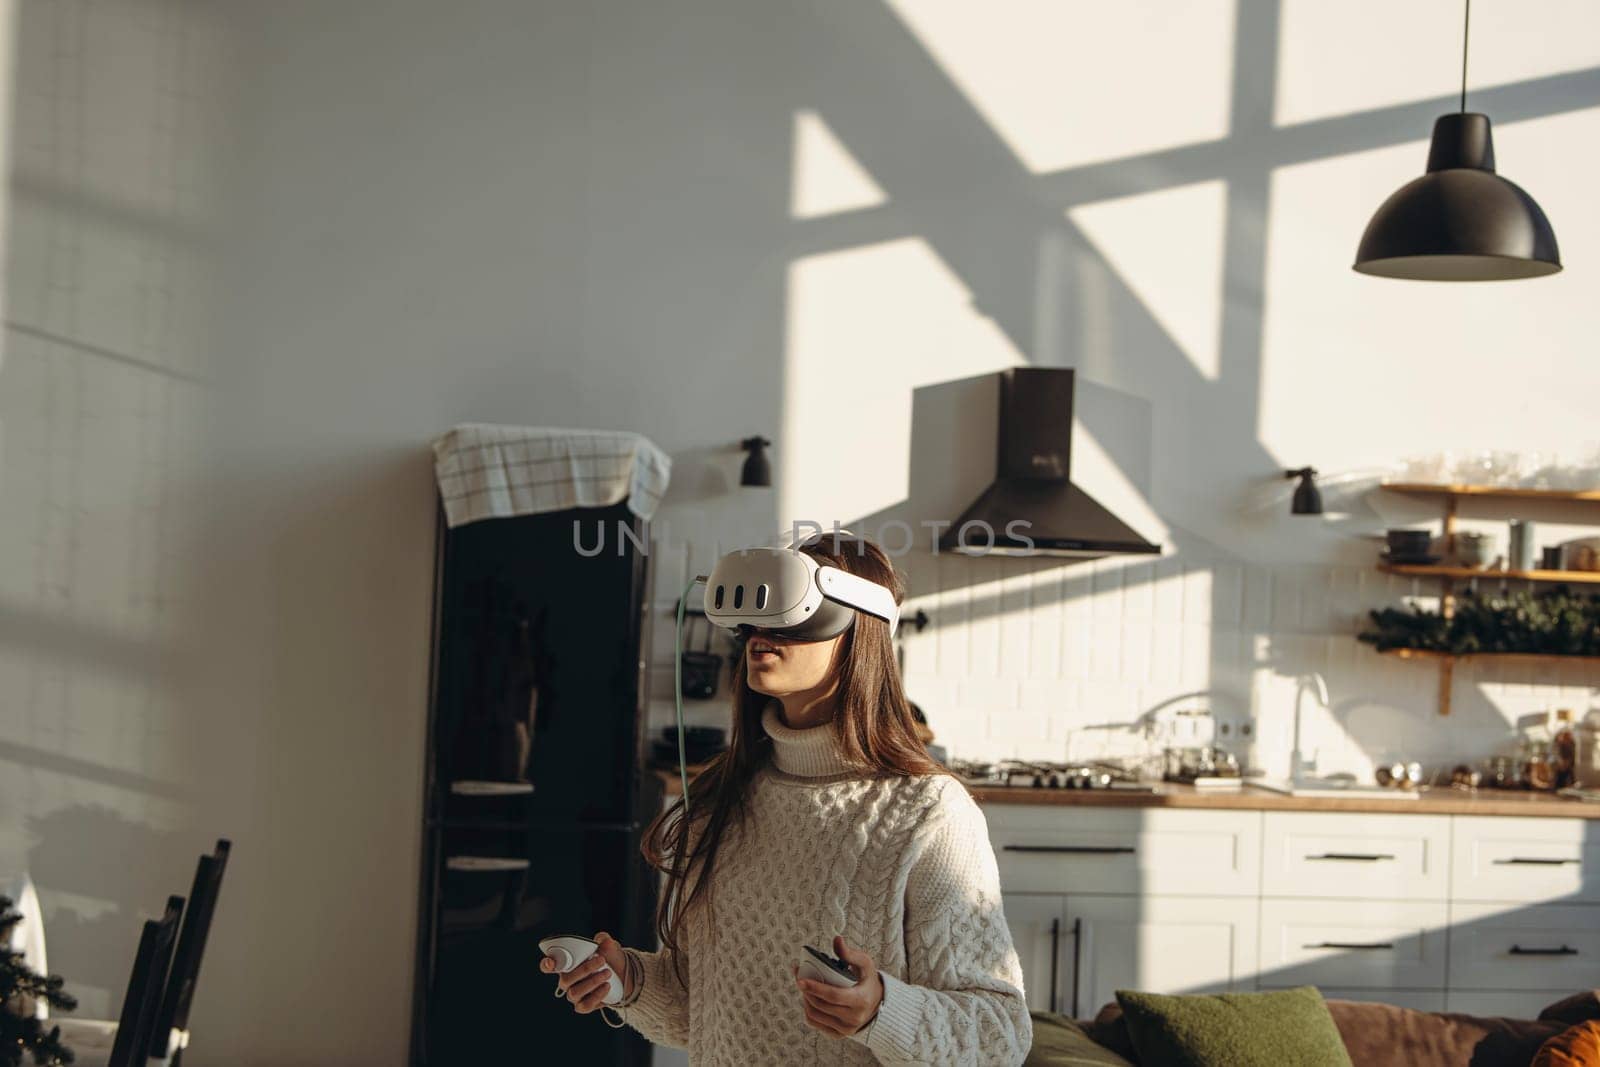 A stunning young woman plays an online game using a virtual reality headset in her apartment. by teksomolika